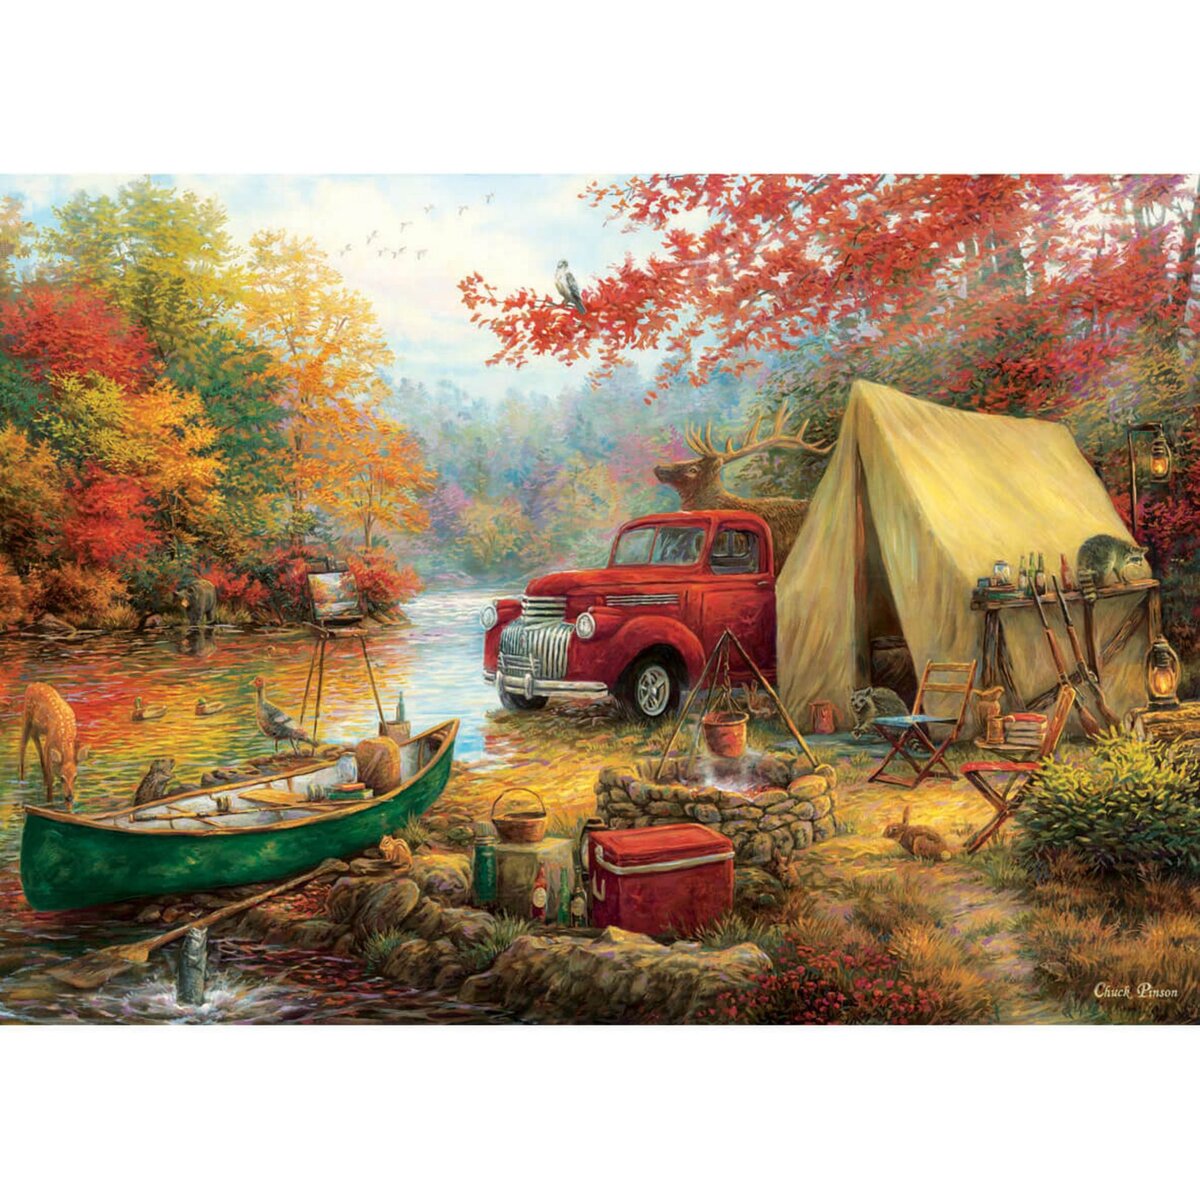 PERRE / ANATOLIAN Puzzle 1500 pièces : Camping sauvage pas cher